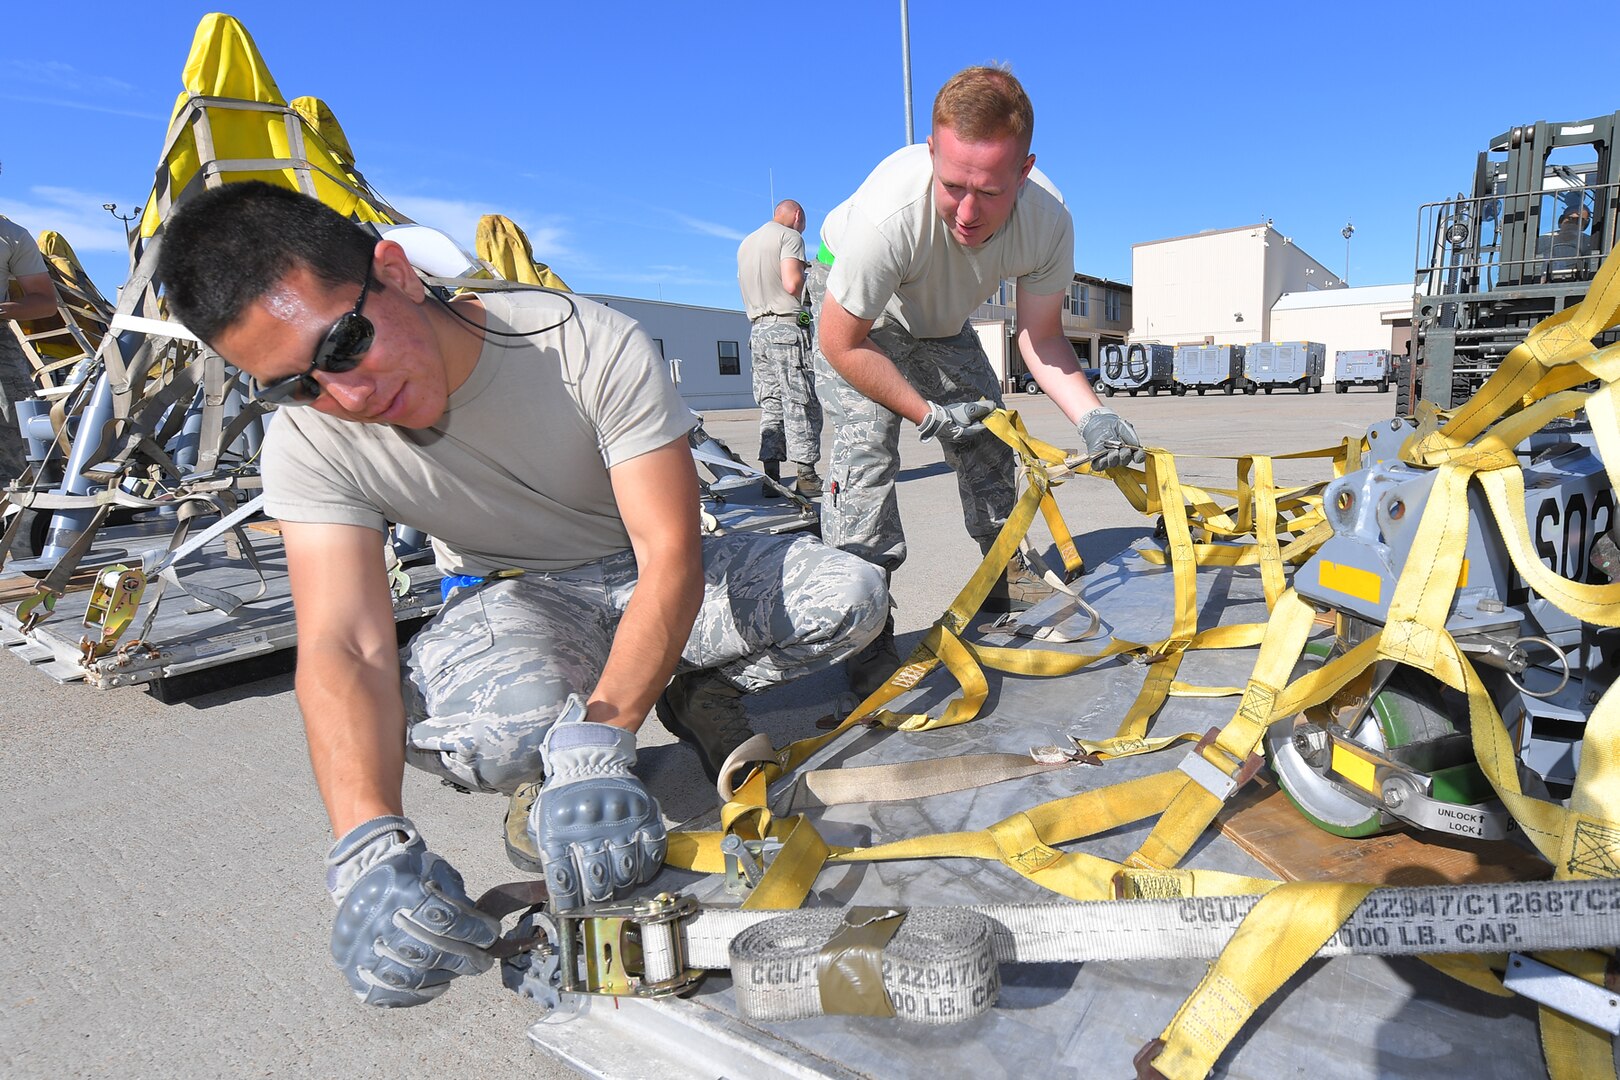 Staff Sgt. Adan Nunez and Airman 1st Class Tyler Russell, 388th Maintenance Squadron, prepare cargo during an exercise July 13, 2018, at Hill Air Force Base Utah. (U.S. Air Force photo by Todd Cromar)